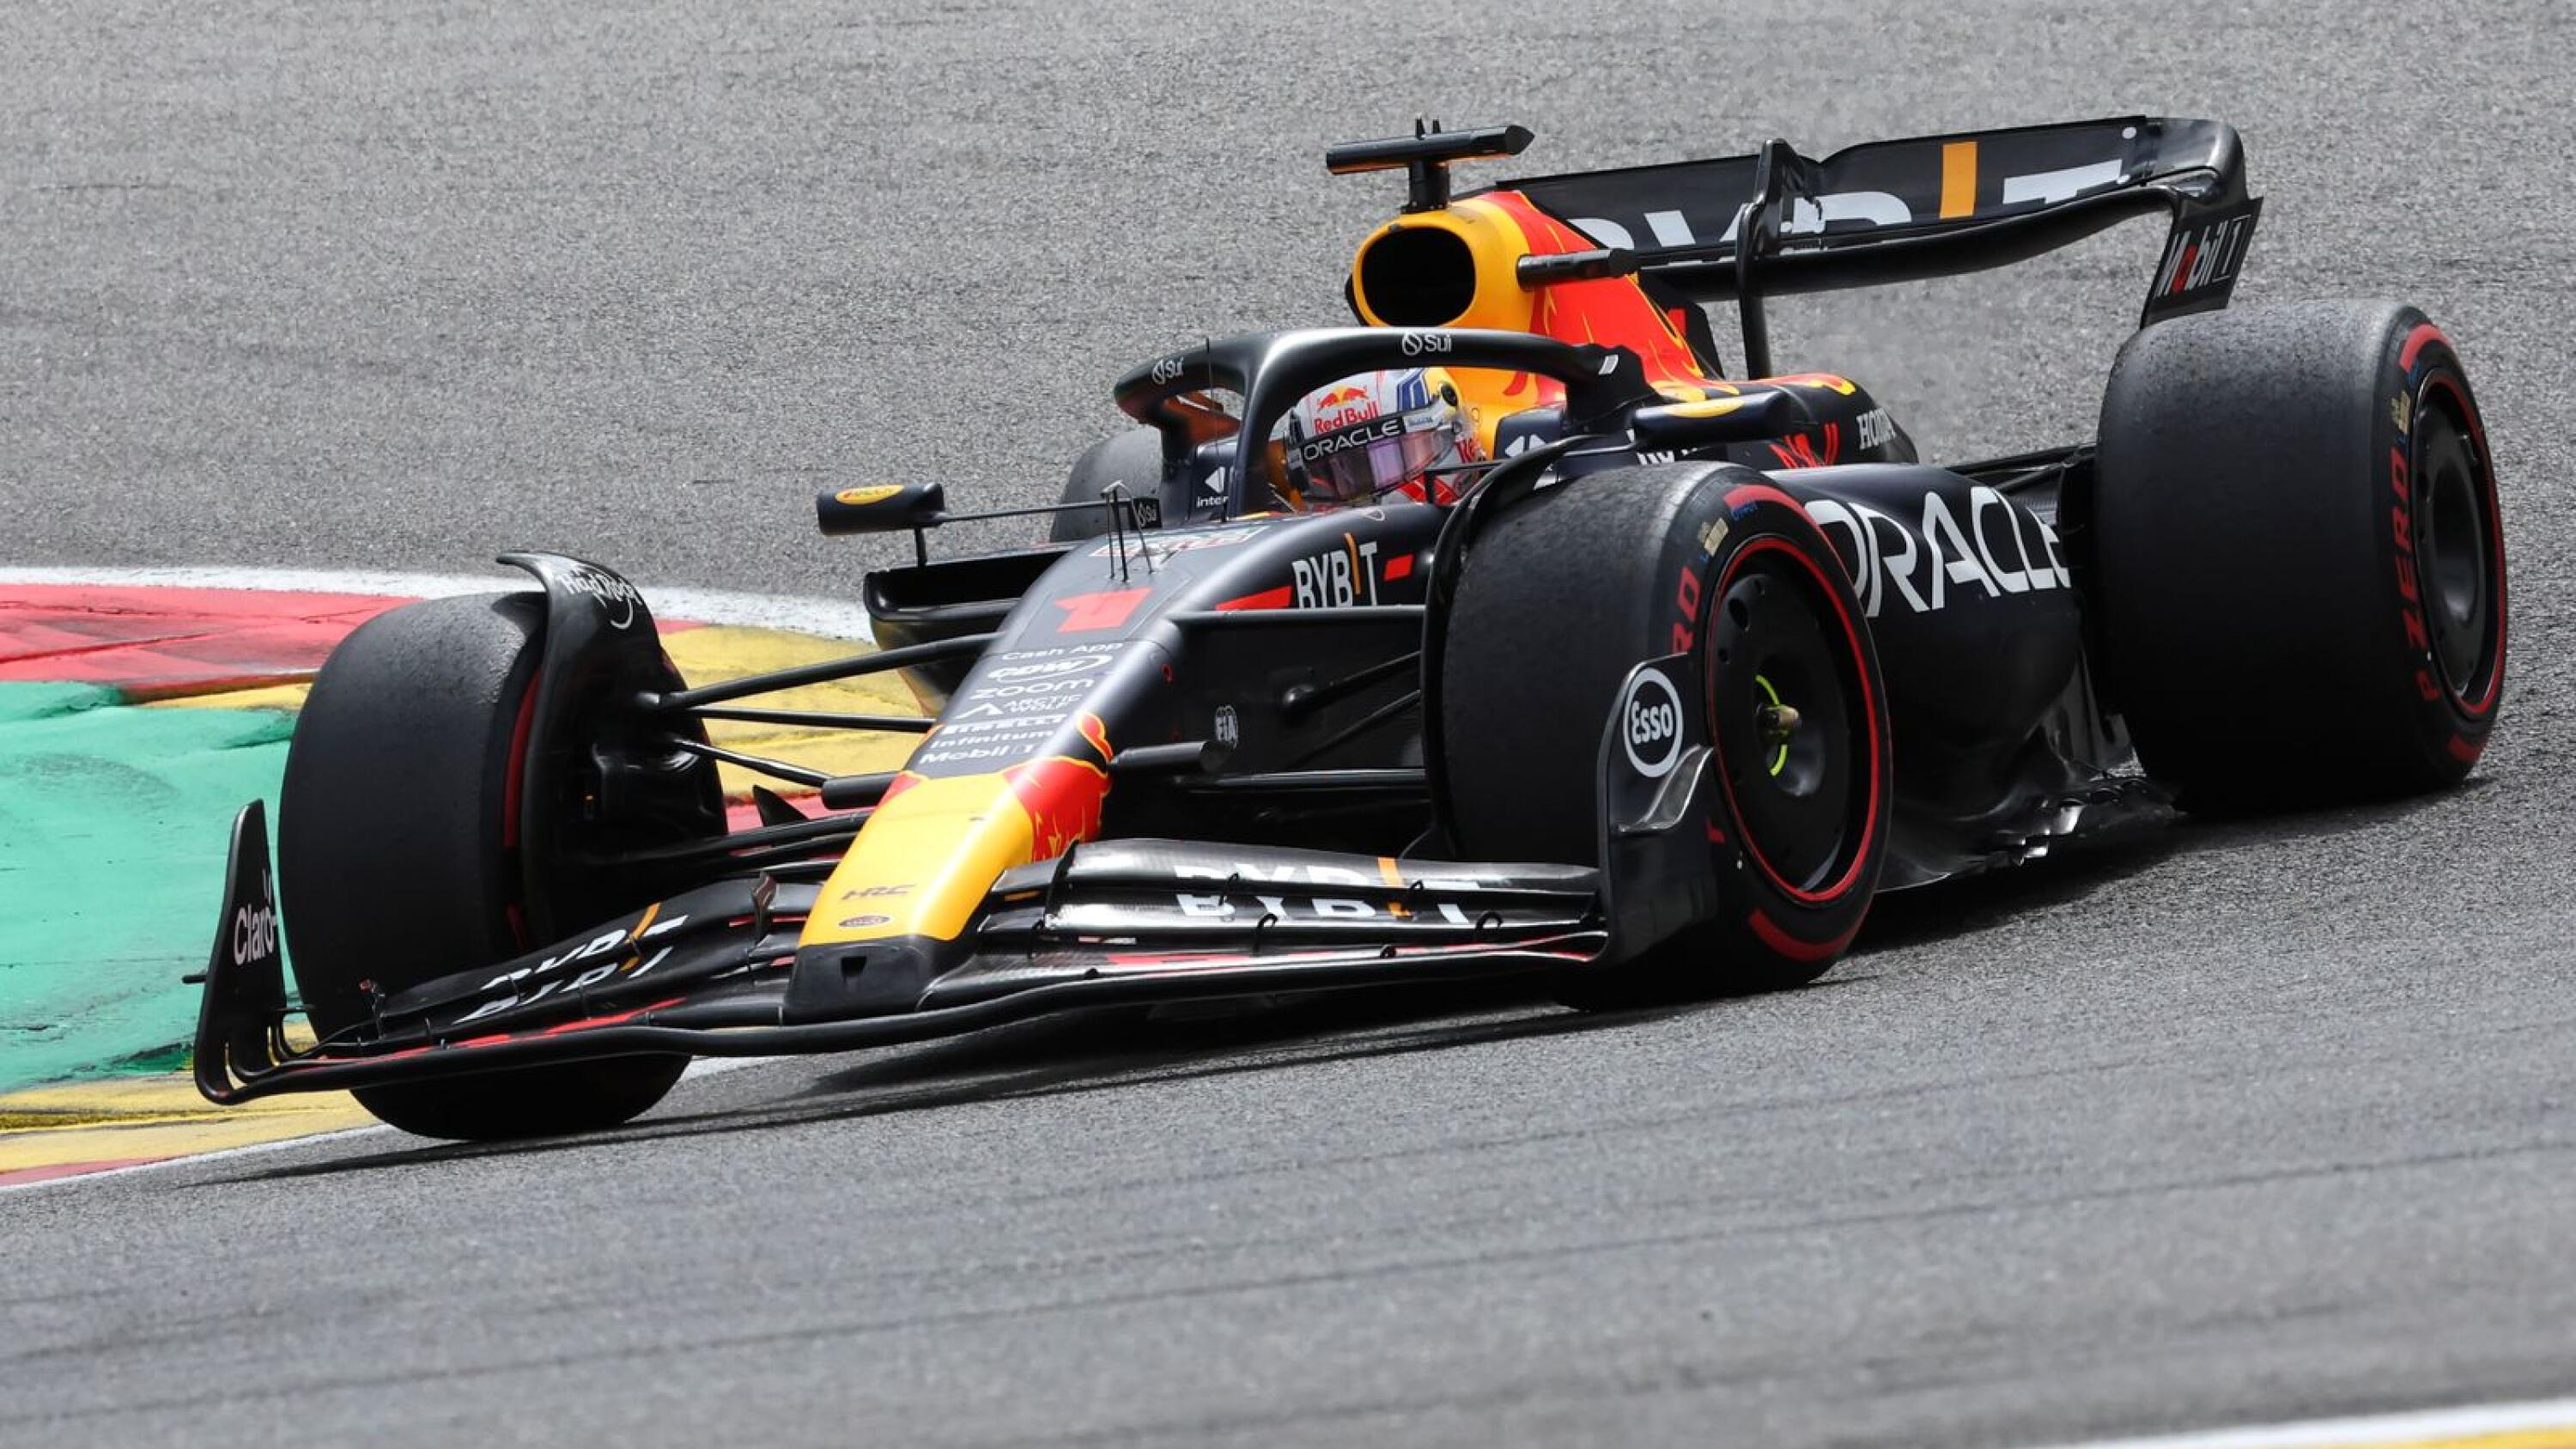 Verstappen looks unstoppable as he enters the F1 break with a massive lead